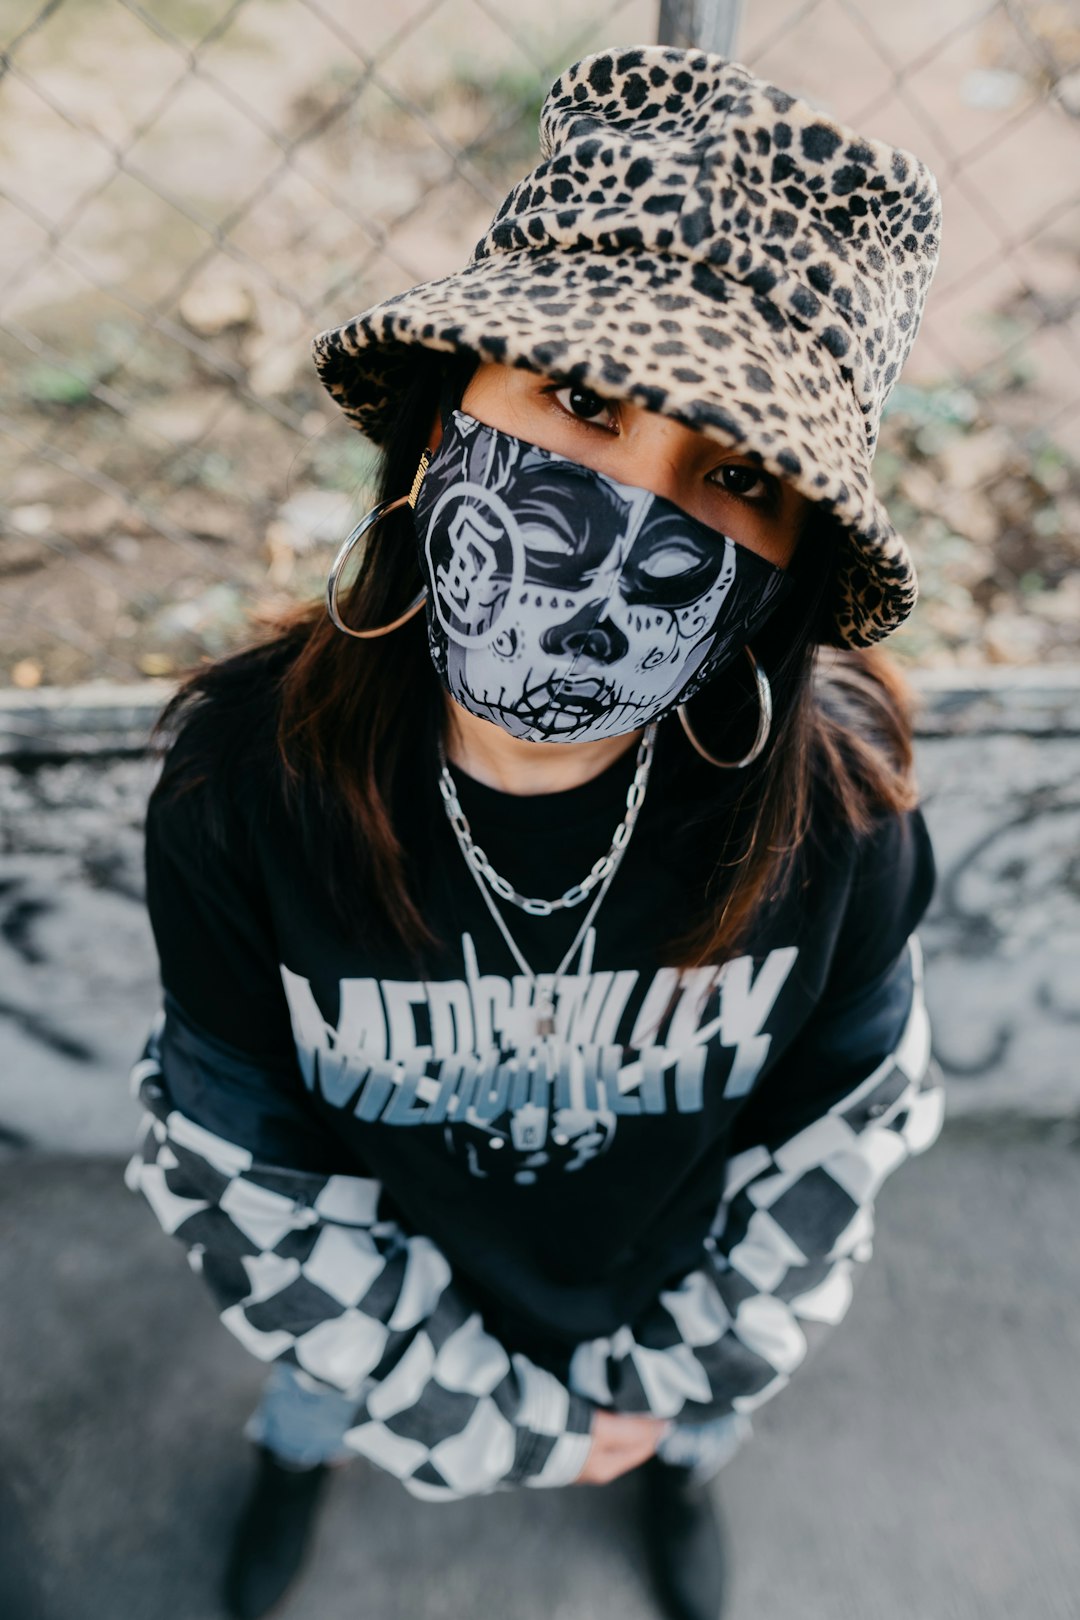 person wearing black and white skull mask